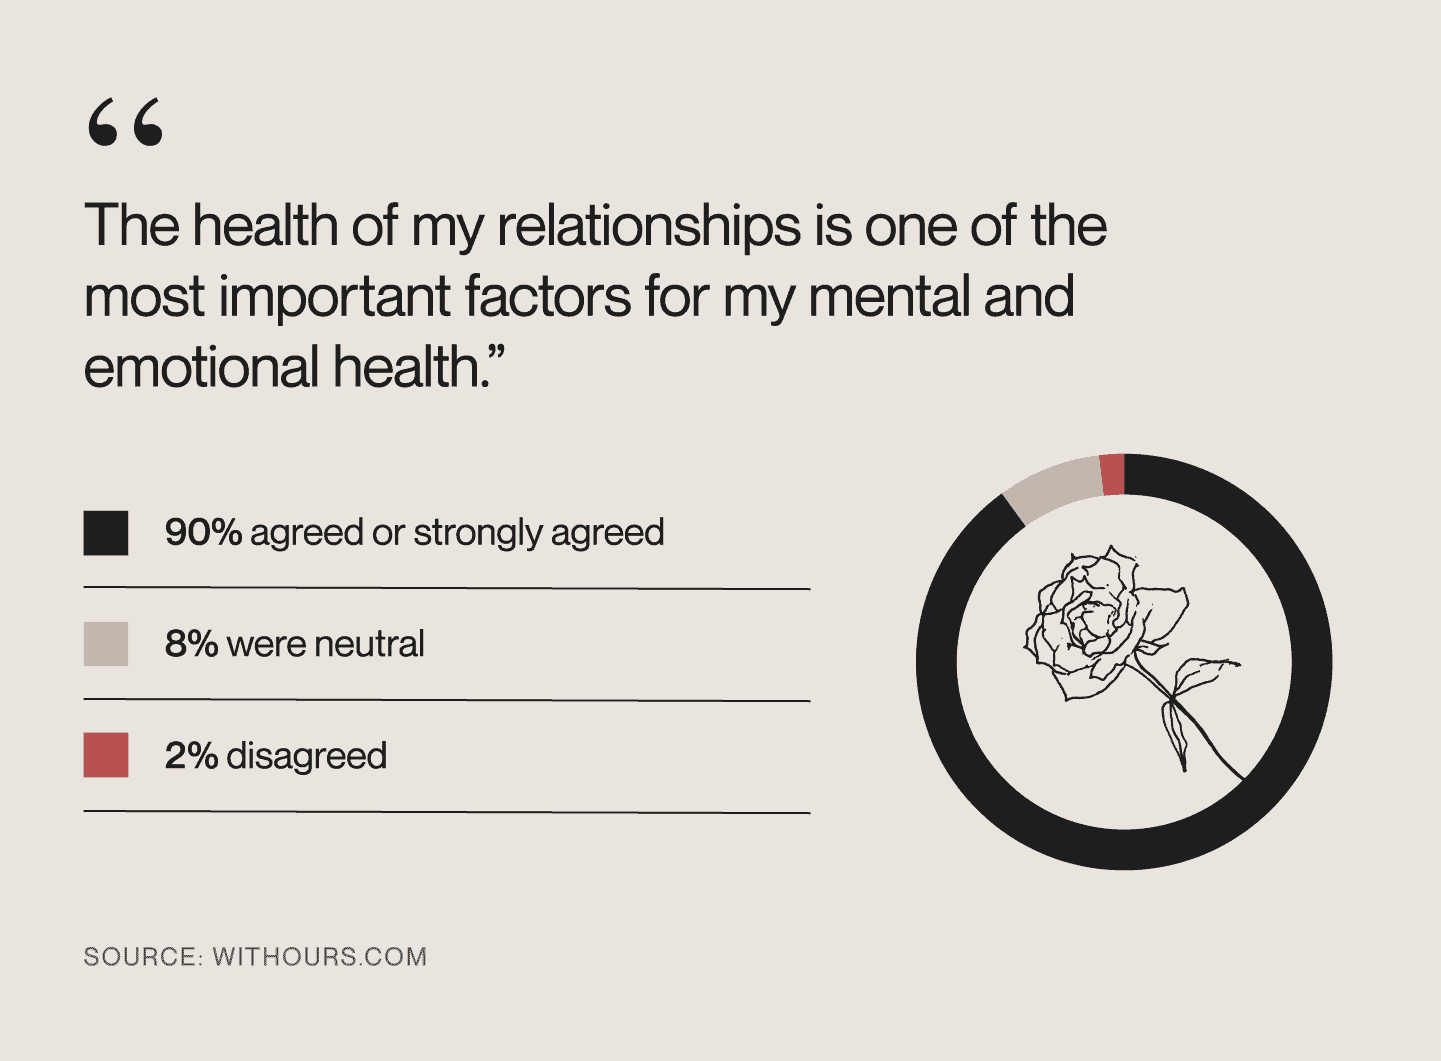 Data about how relationships affect mental and emotional health.